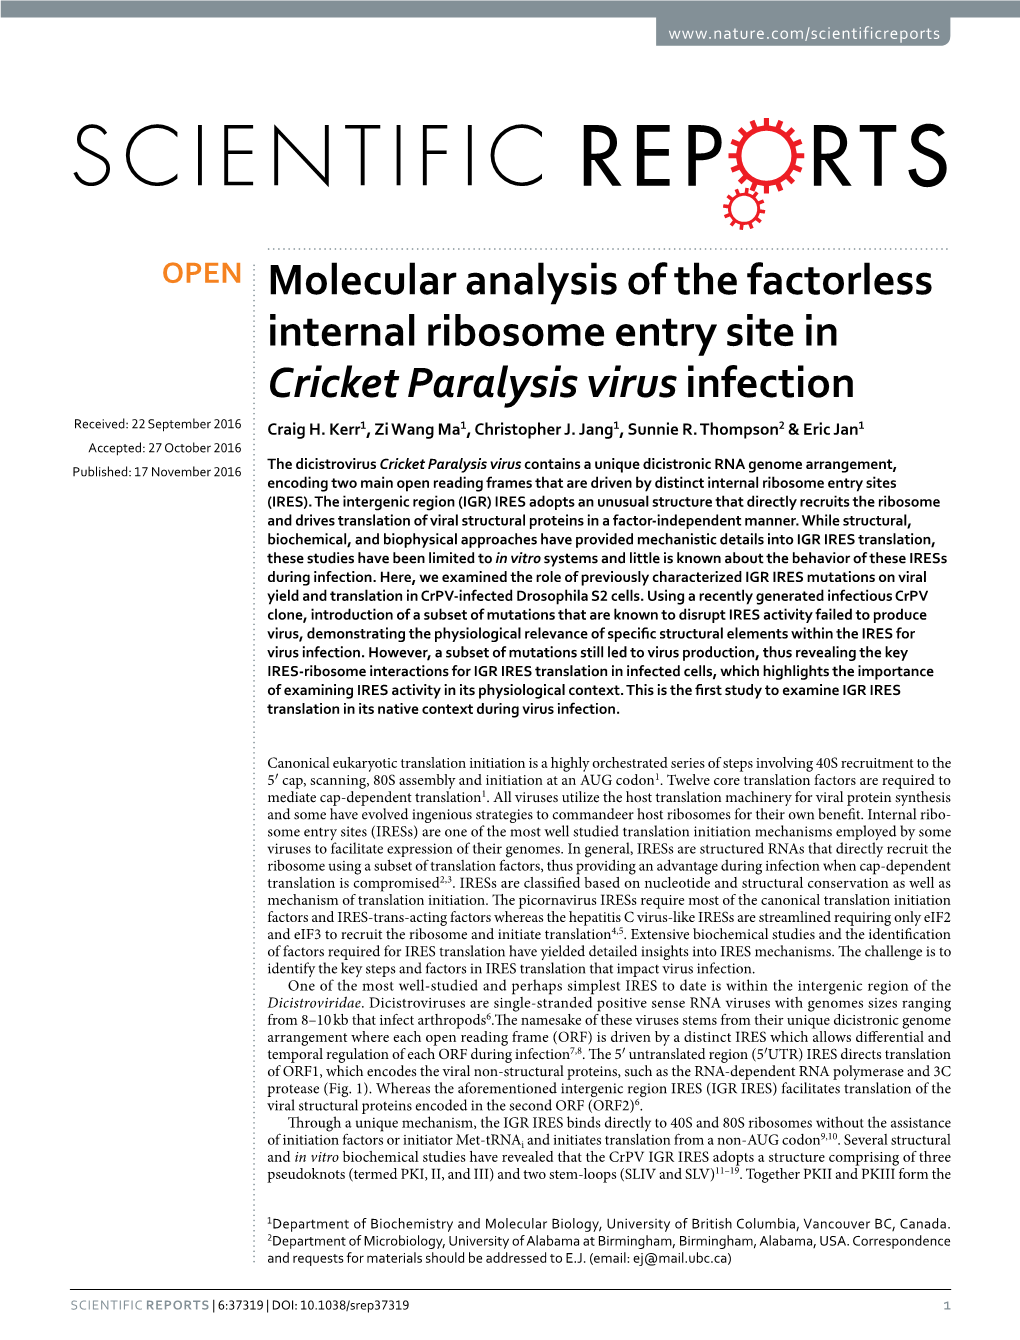 Molecular Analysis of the Factorless Internal Ribosome Entry Site in Cricket Paralysis Virus Infection Received: 22 September 2016 Craig H